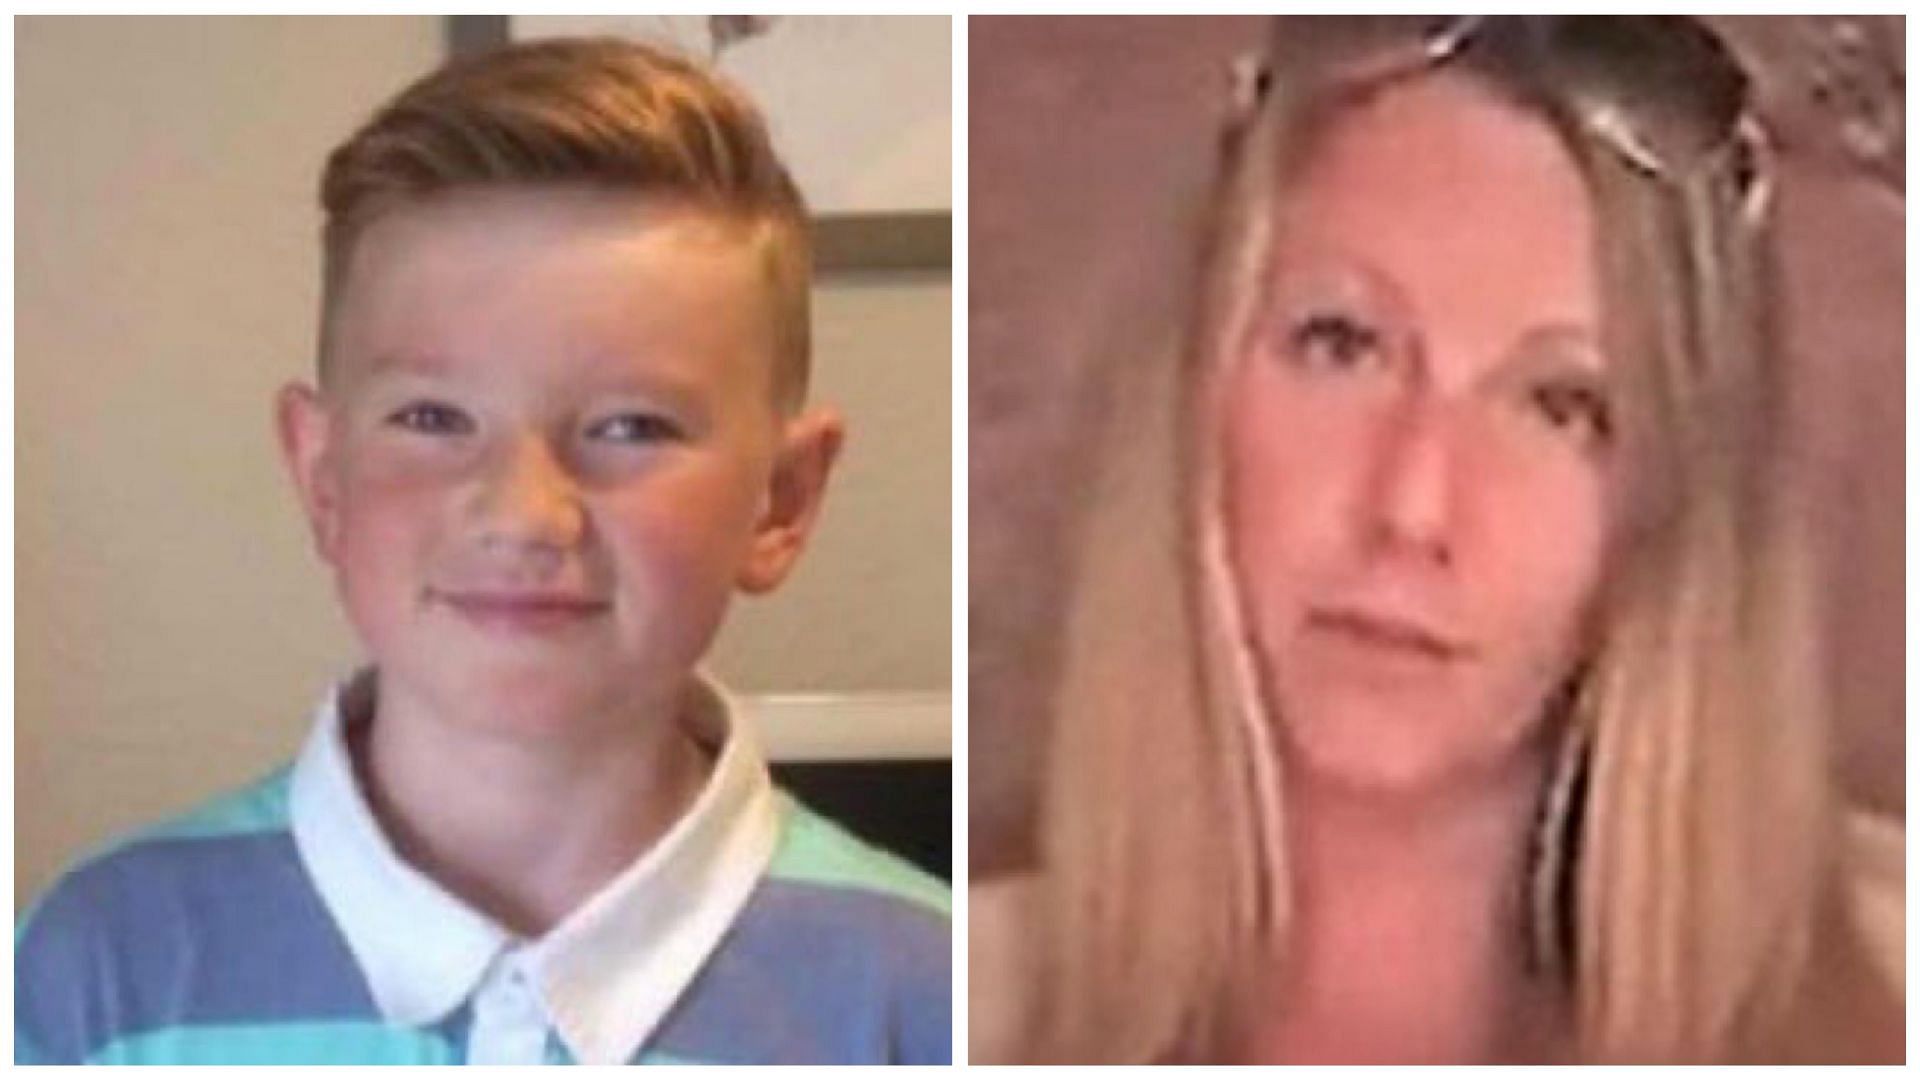 Alex Batty (left) who was kidnapped by his mother Melanie Batty (right) was found 6 years after going missing (Image via @ShadowofEzra and @Justice_forum/X)